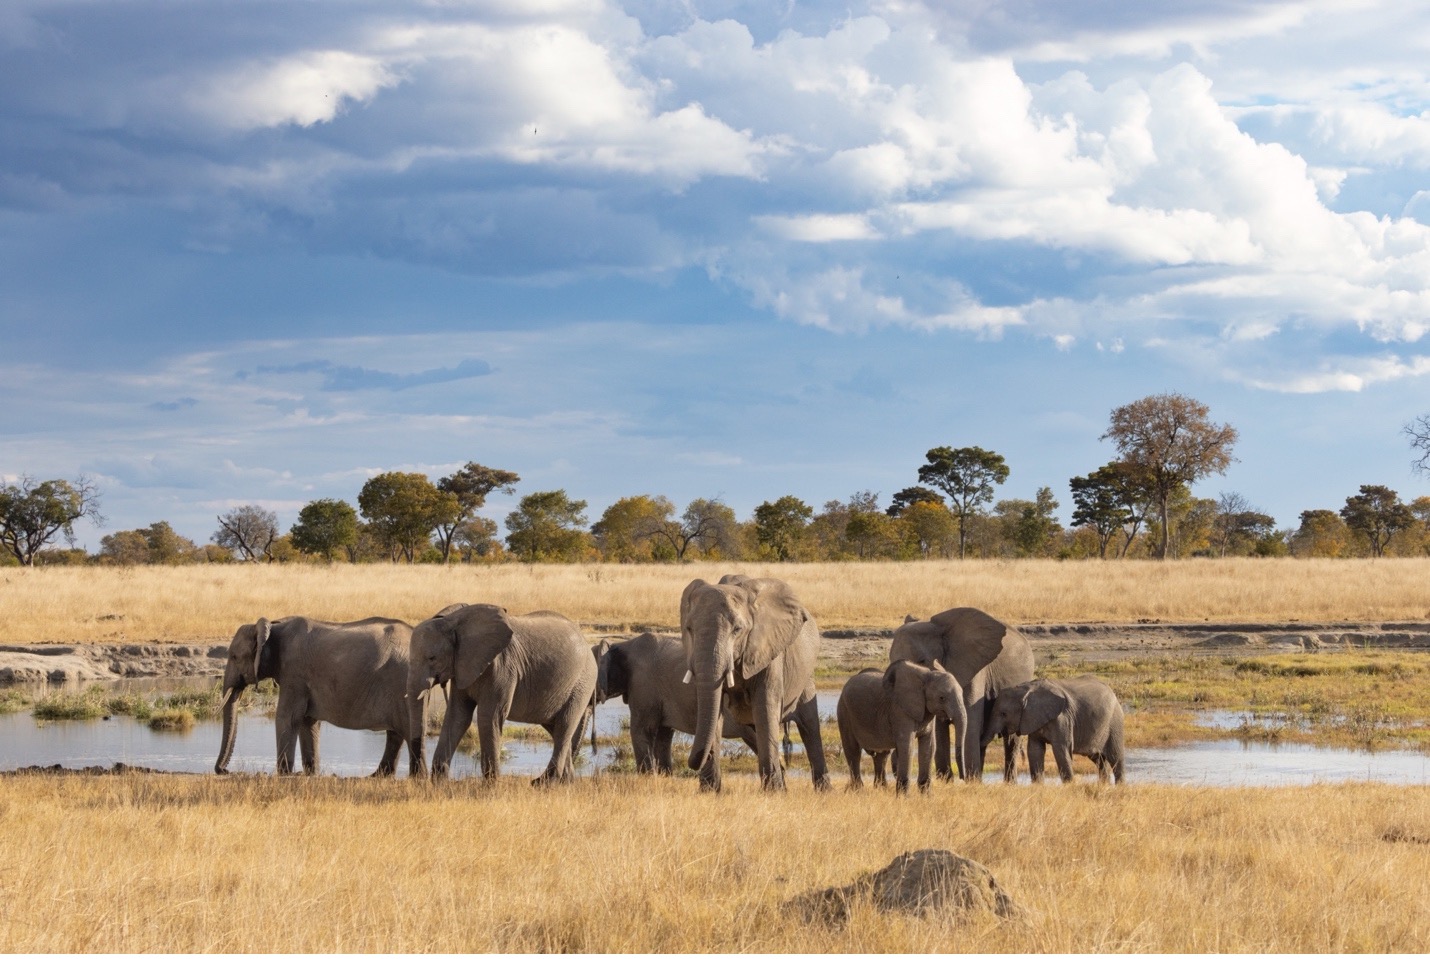 elephants congregate around a watering hole